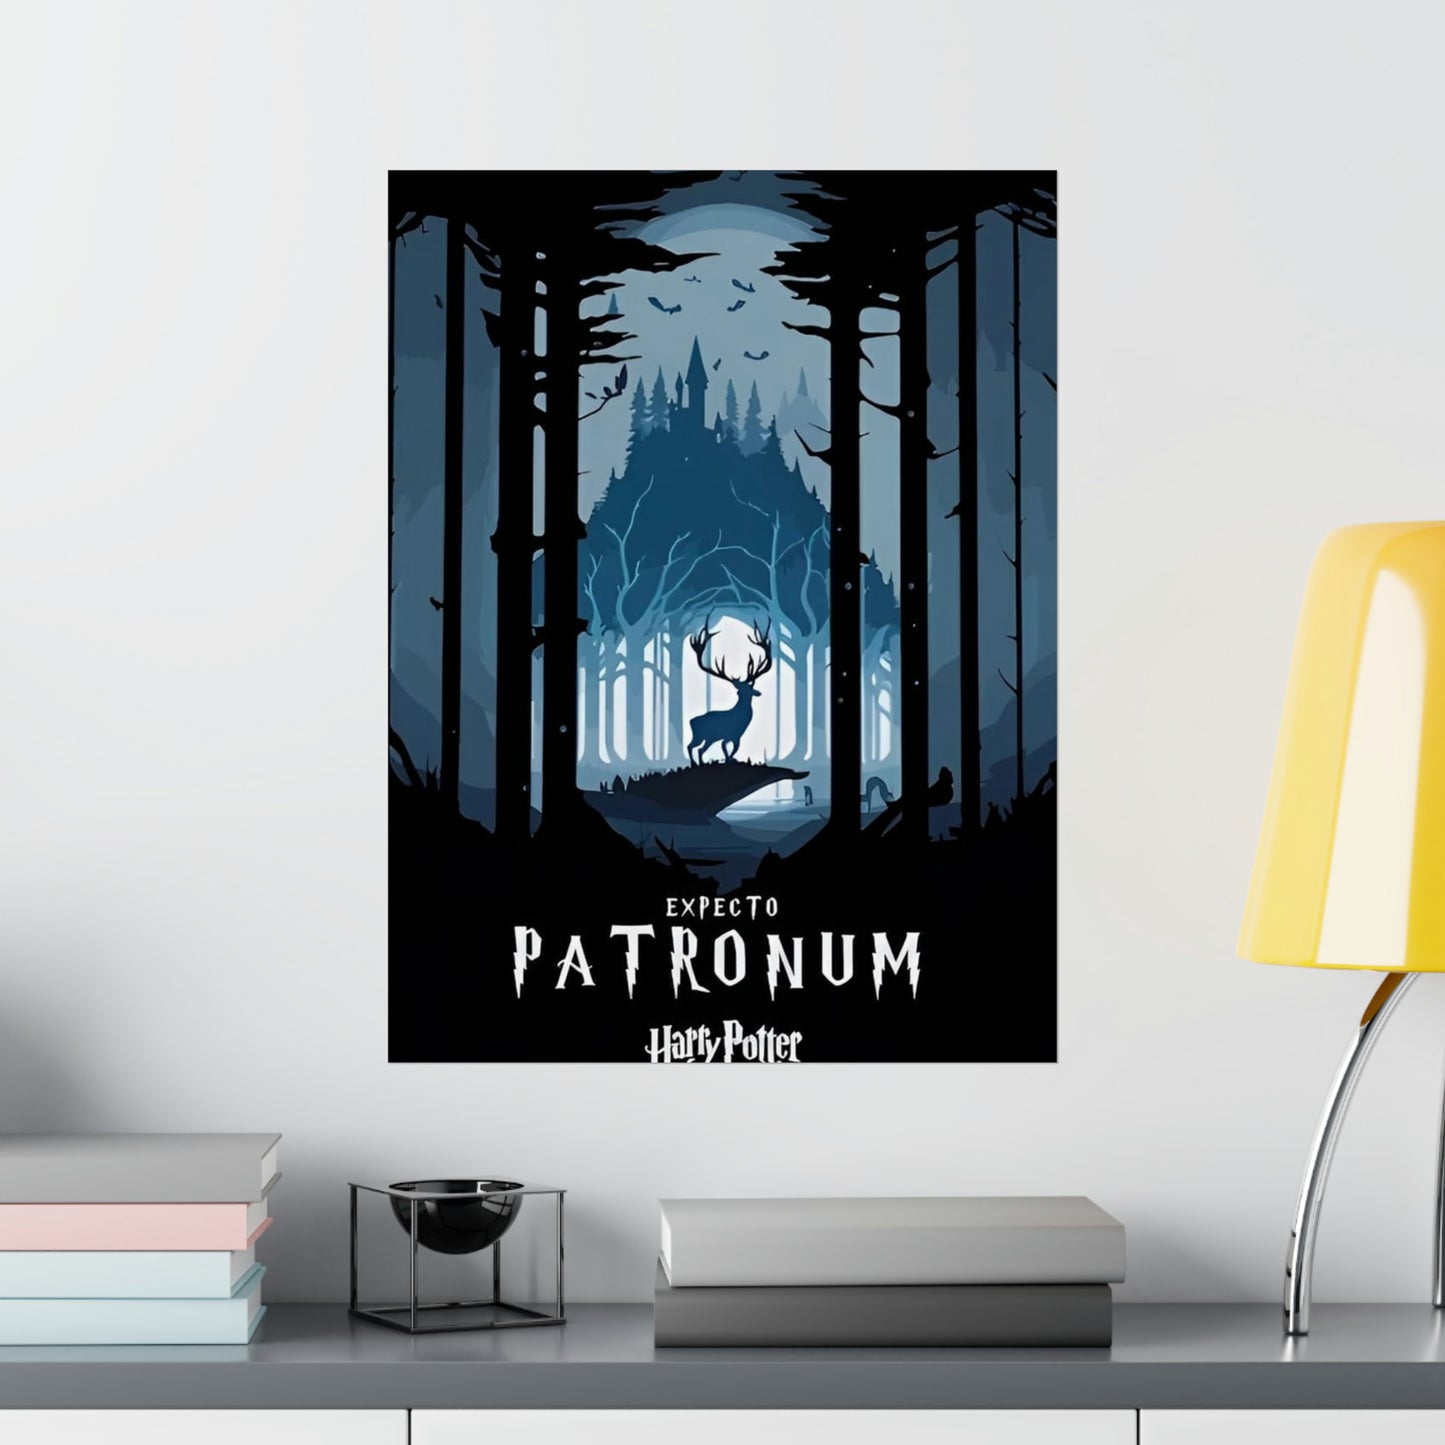 EXPECTO PATRONUM HARRY POTTER POSTER